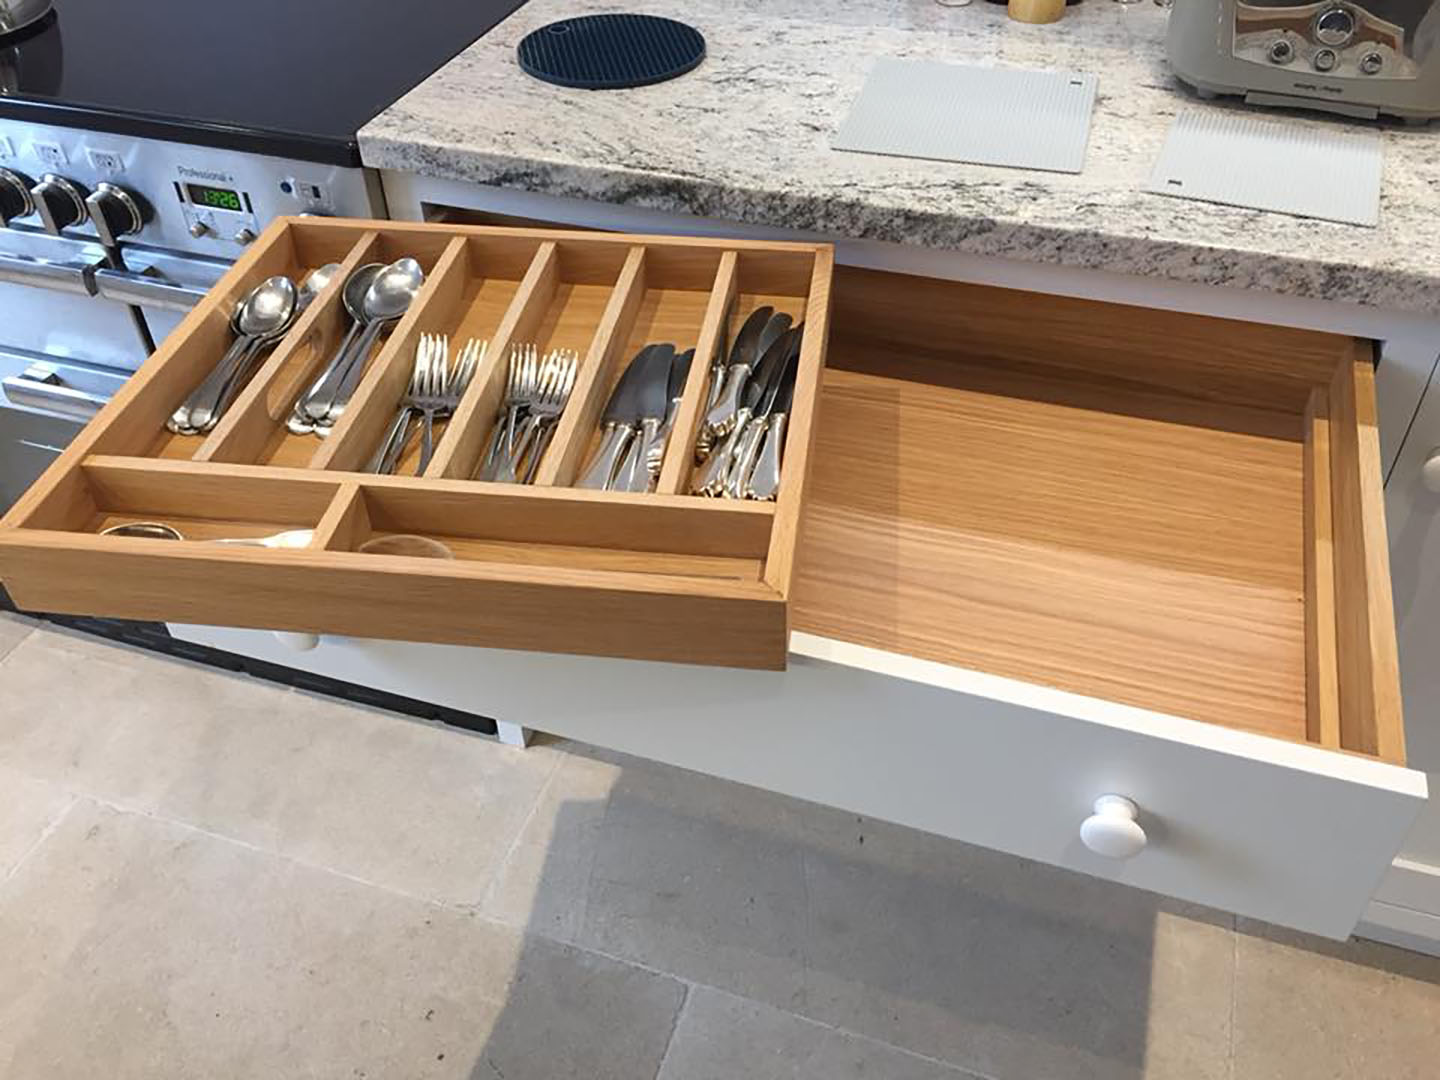 The cutlery draw showing the utensils inside.